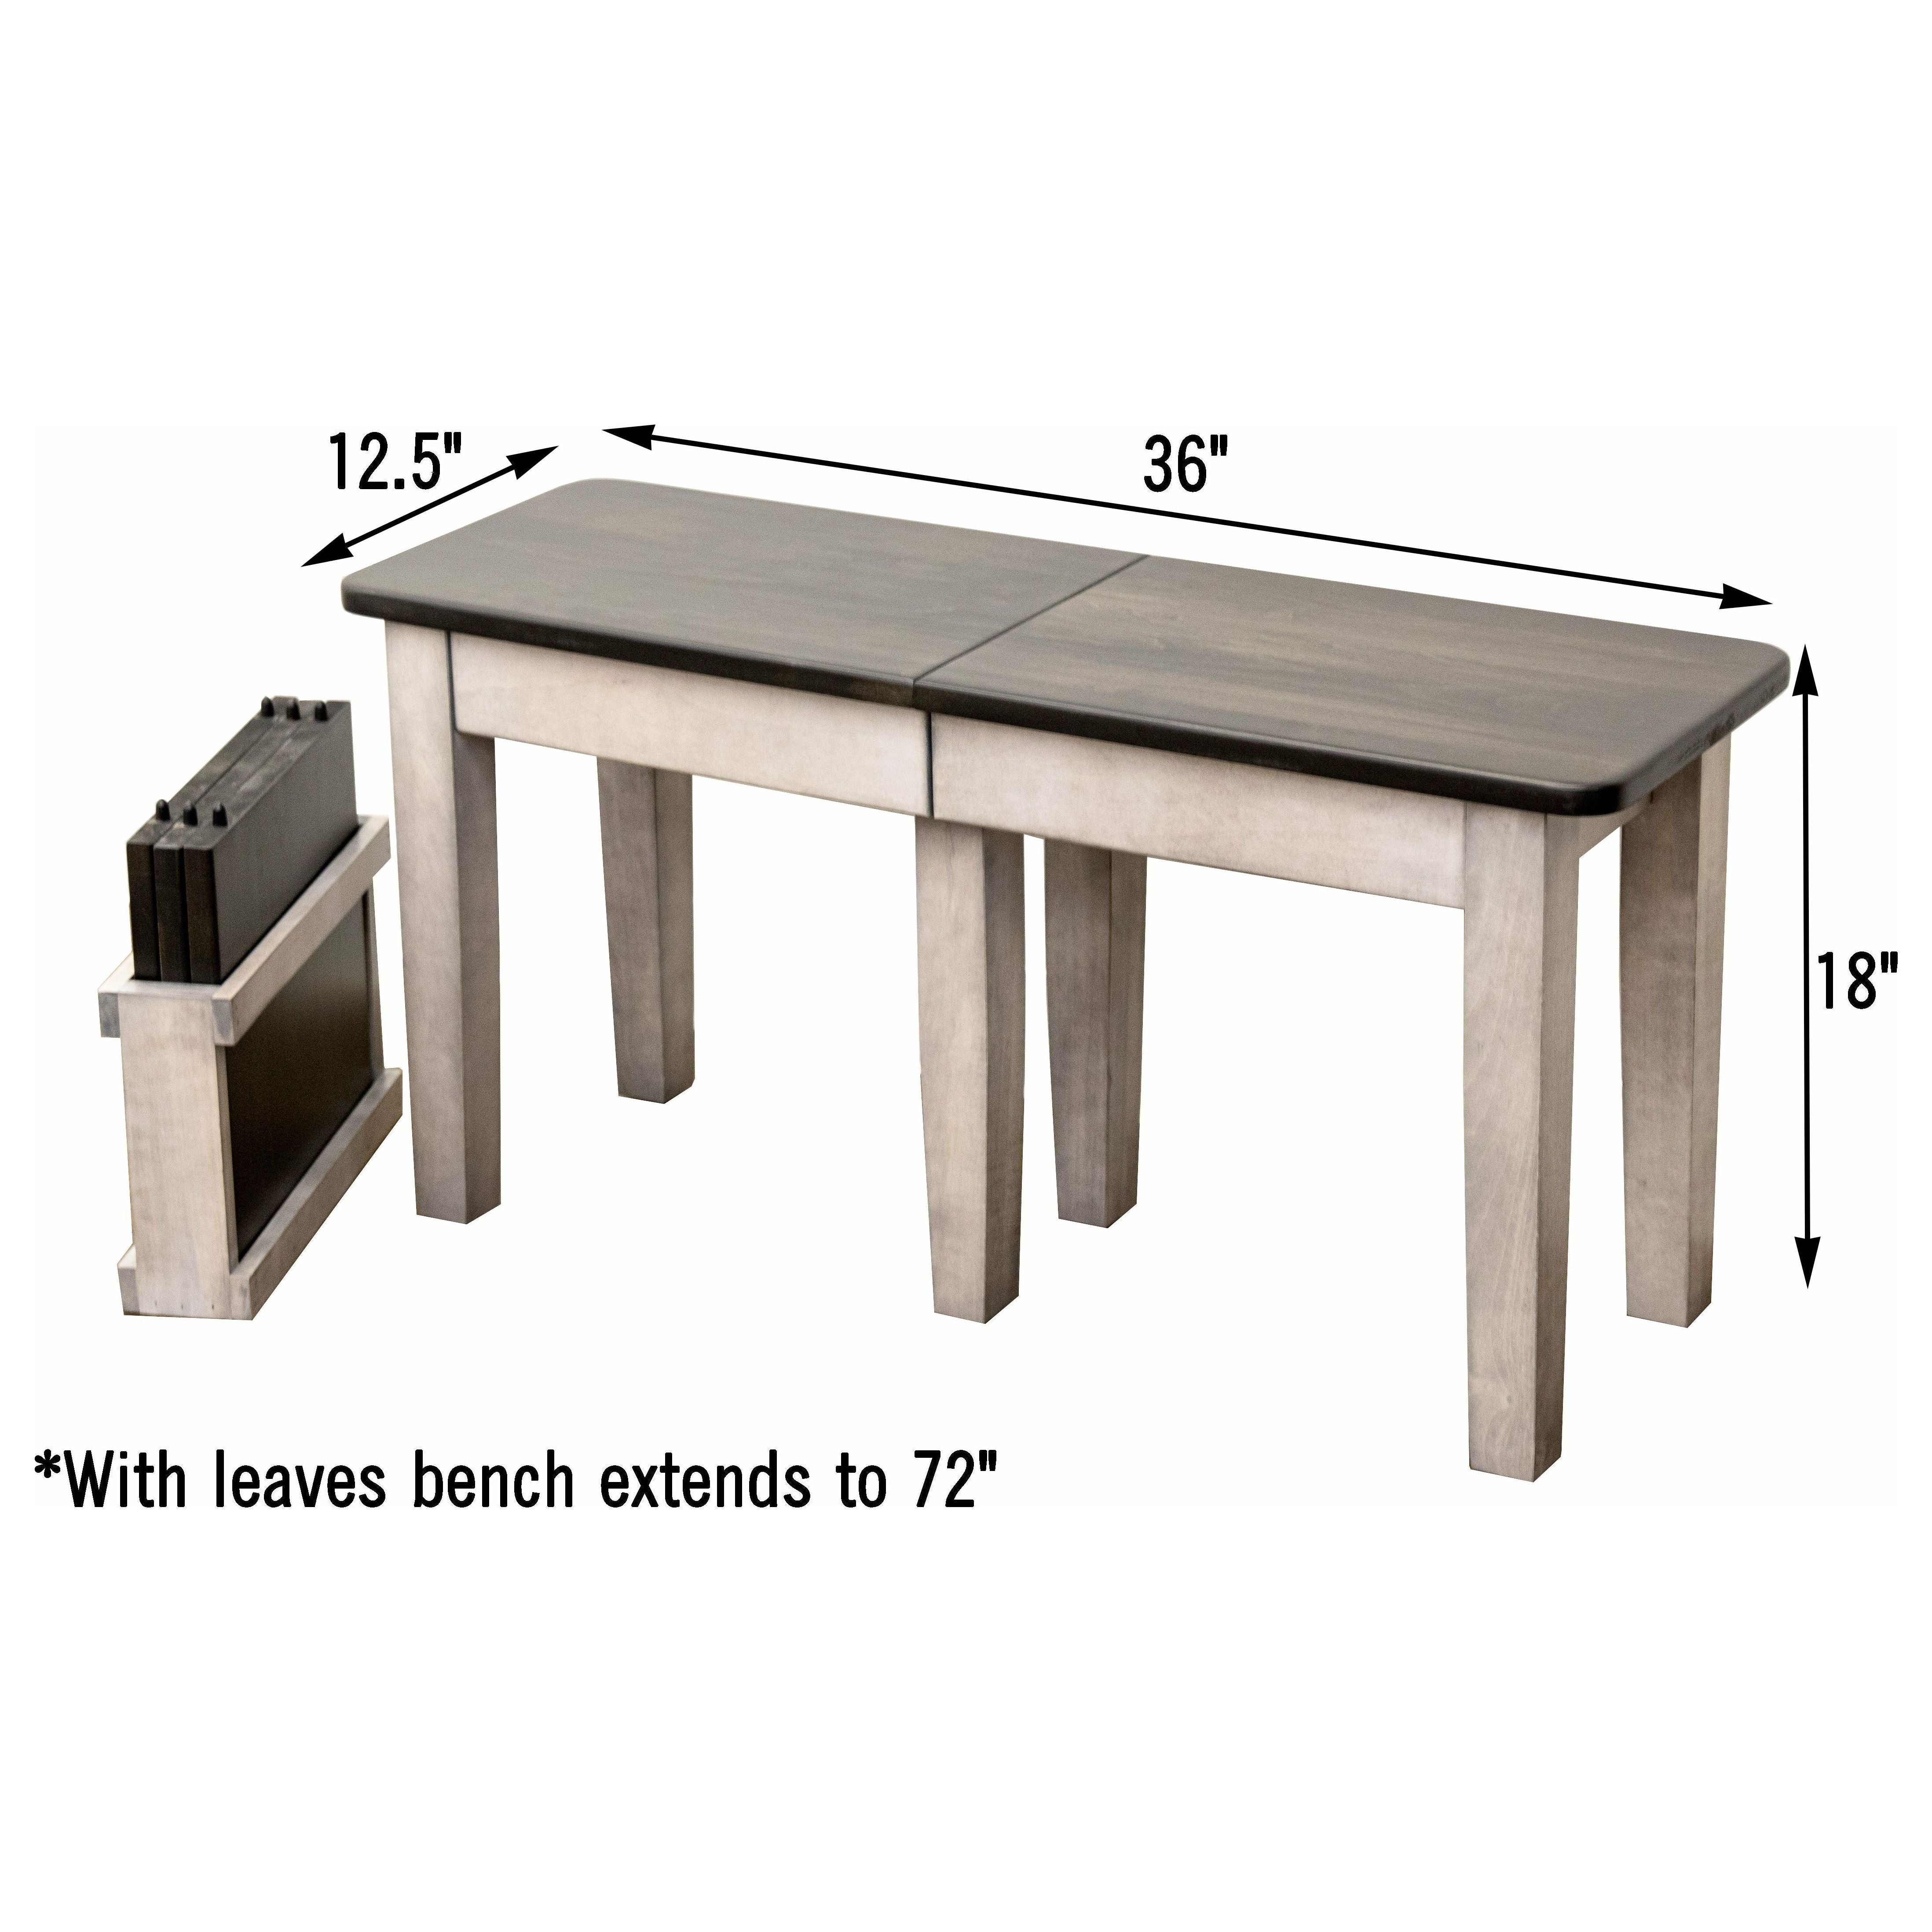 Shaker Expandable Bench, 3' to 6'